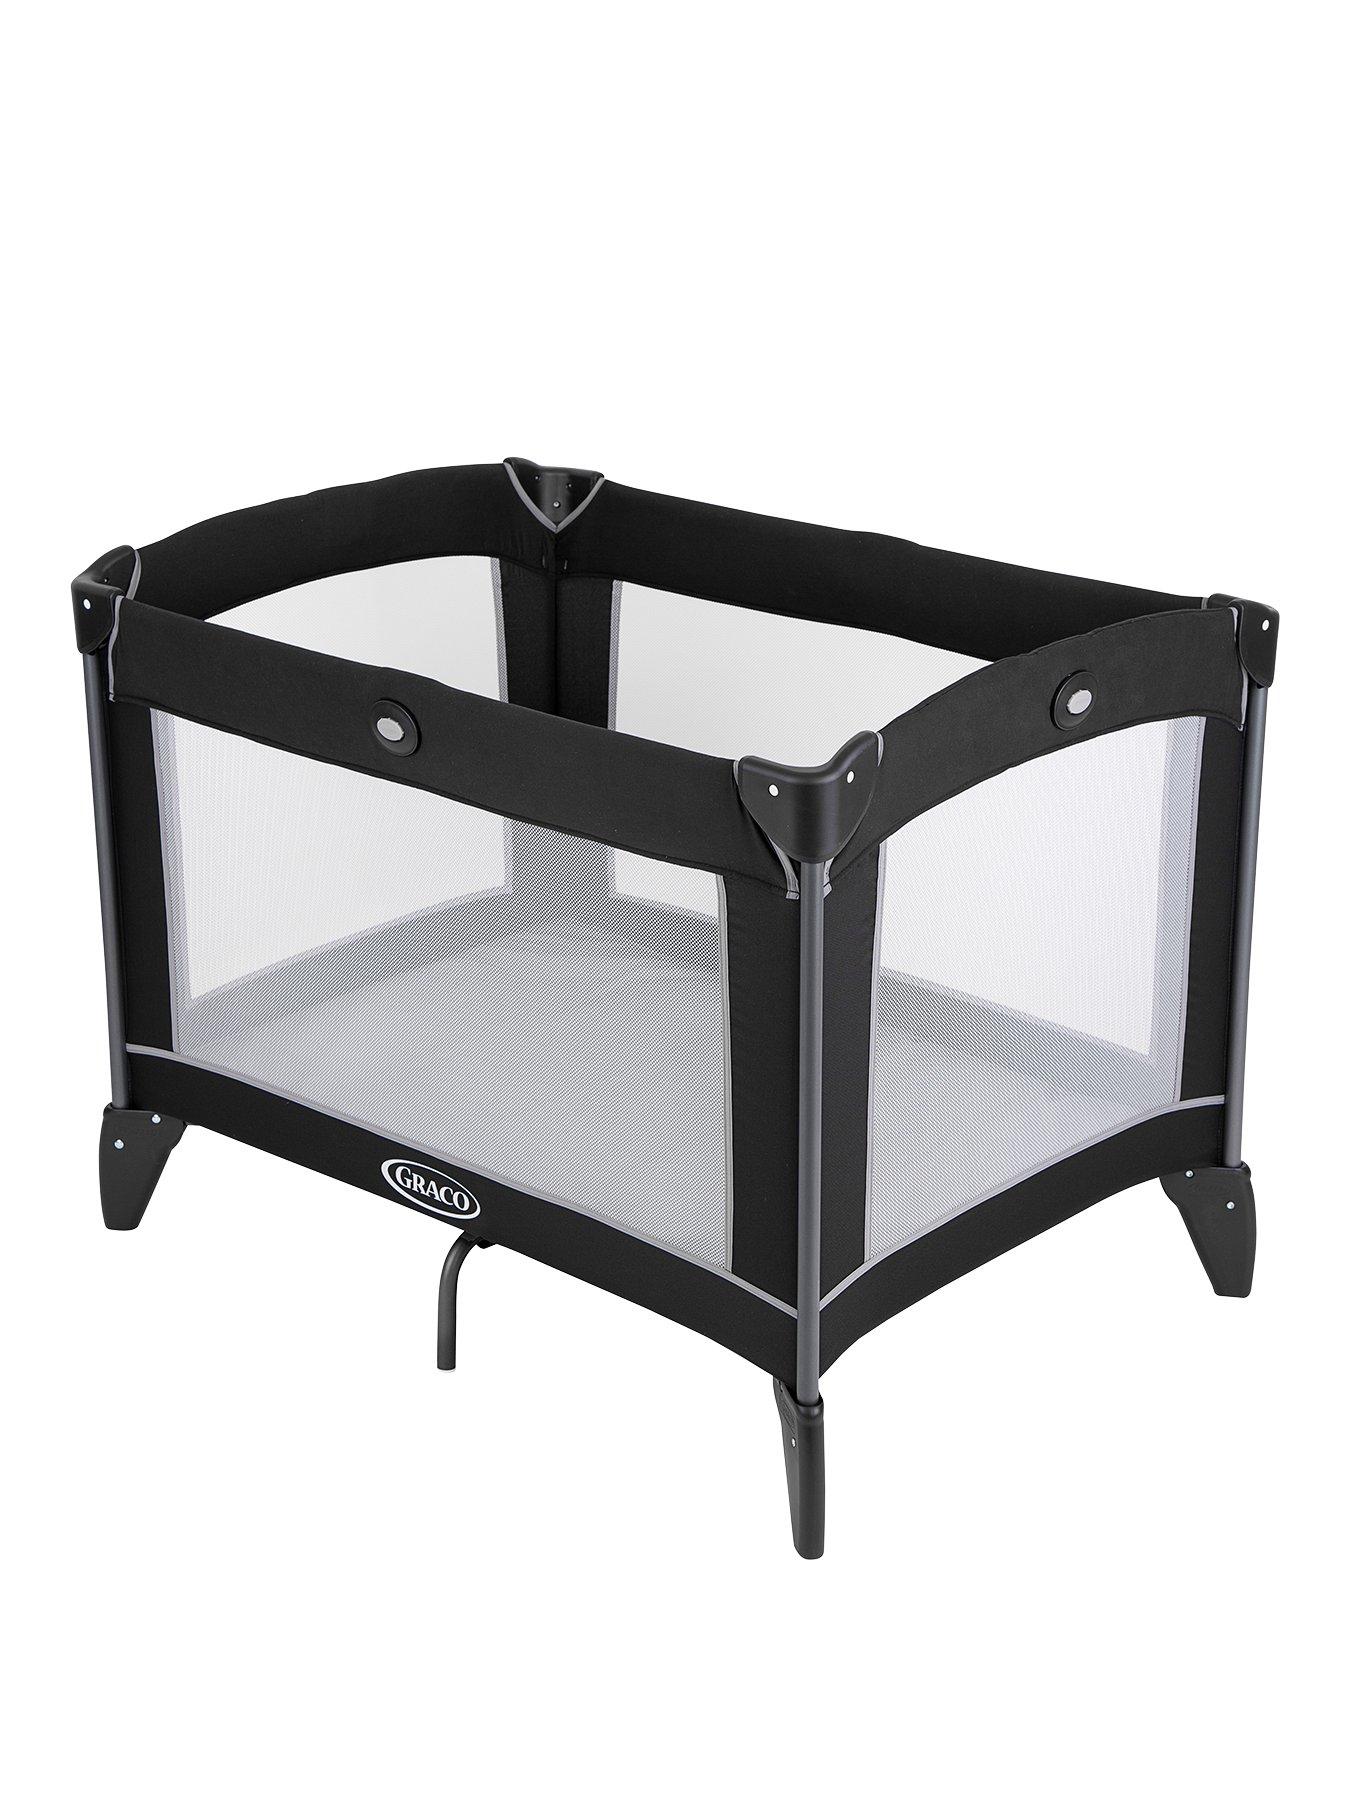  image of graco-compact-travel-cot-blackgrey